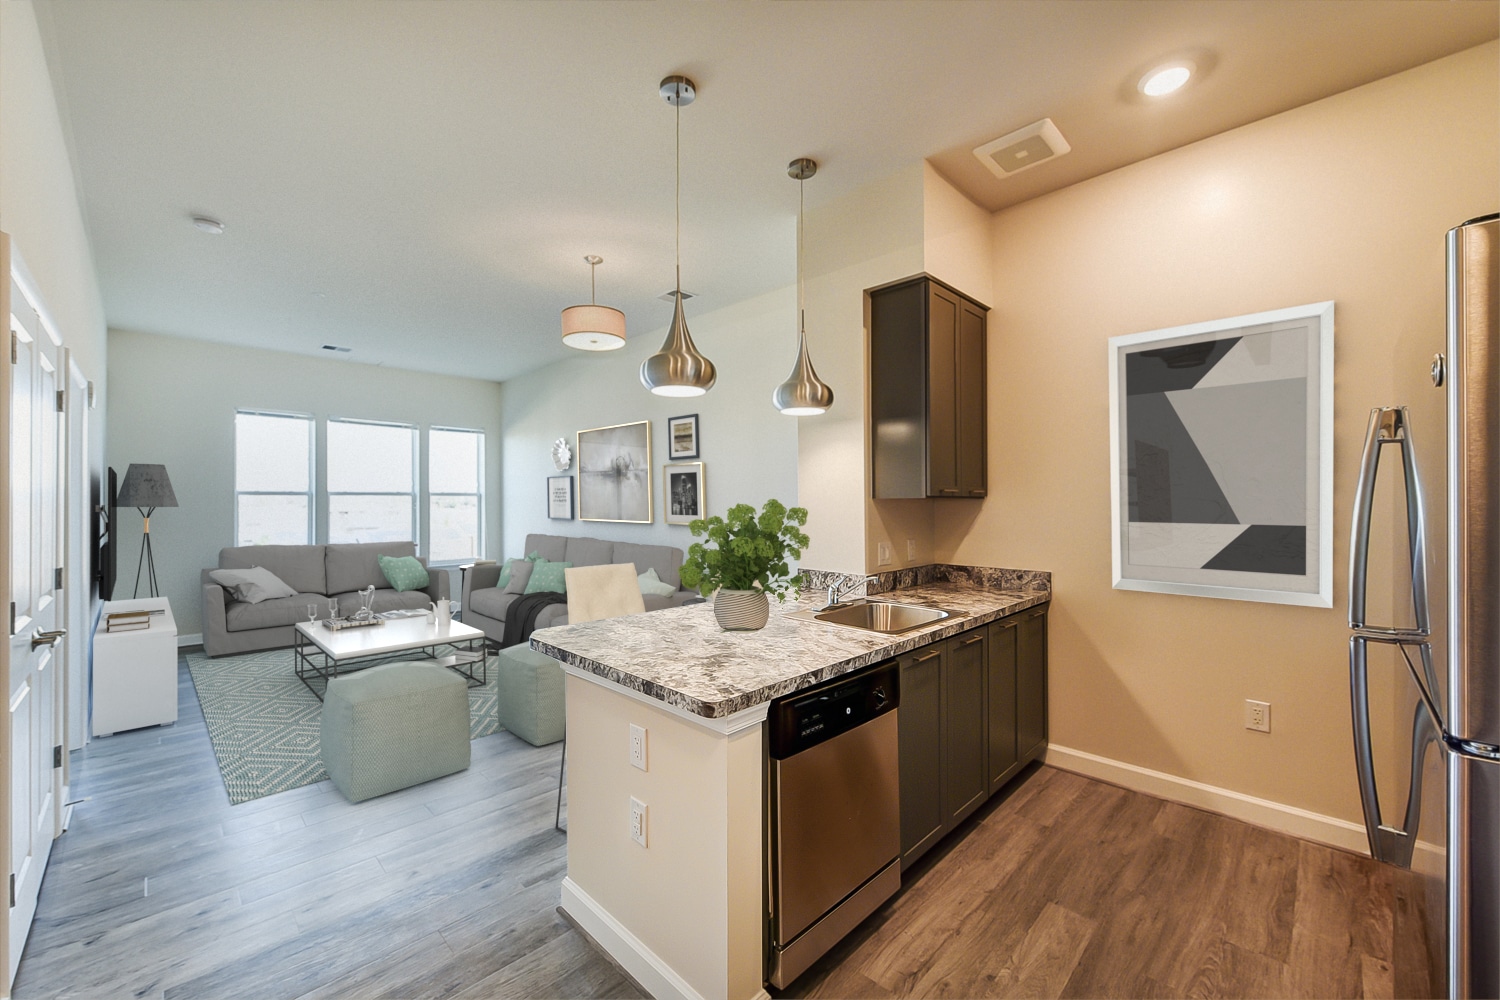 open layout showing kitchen and living area at city view apartments in washington dc